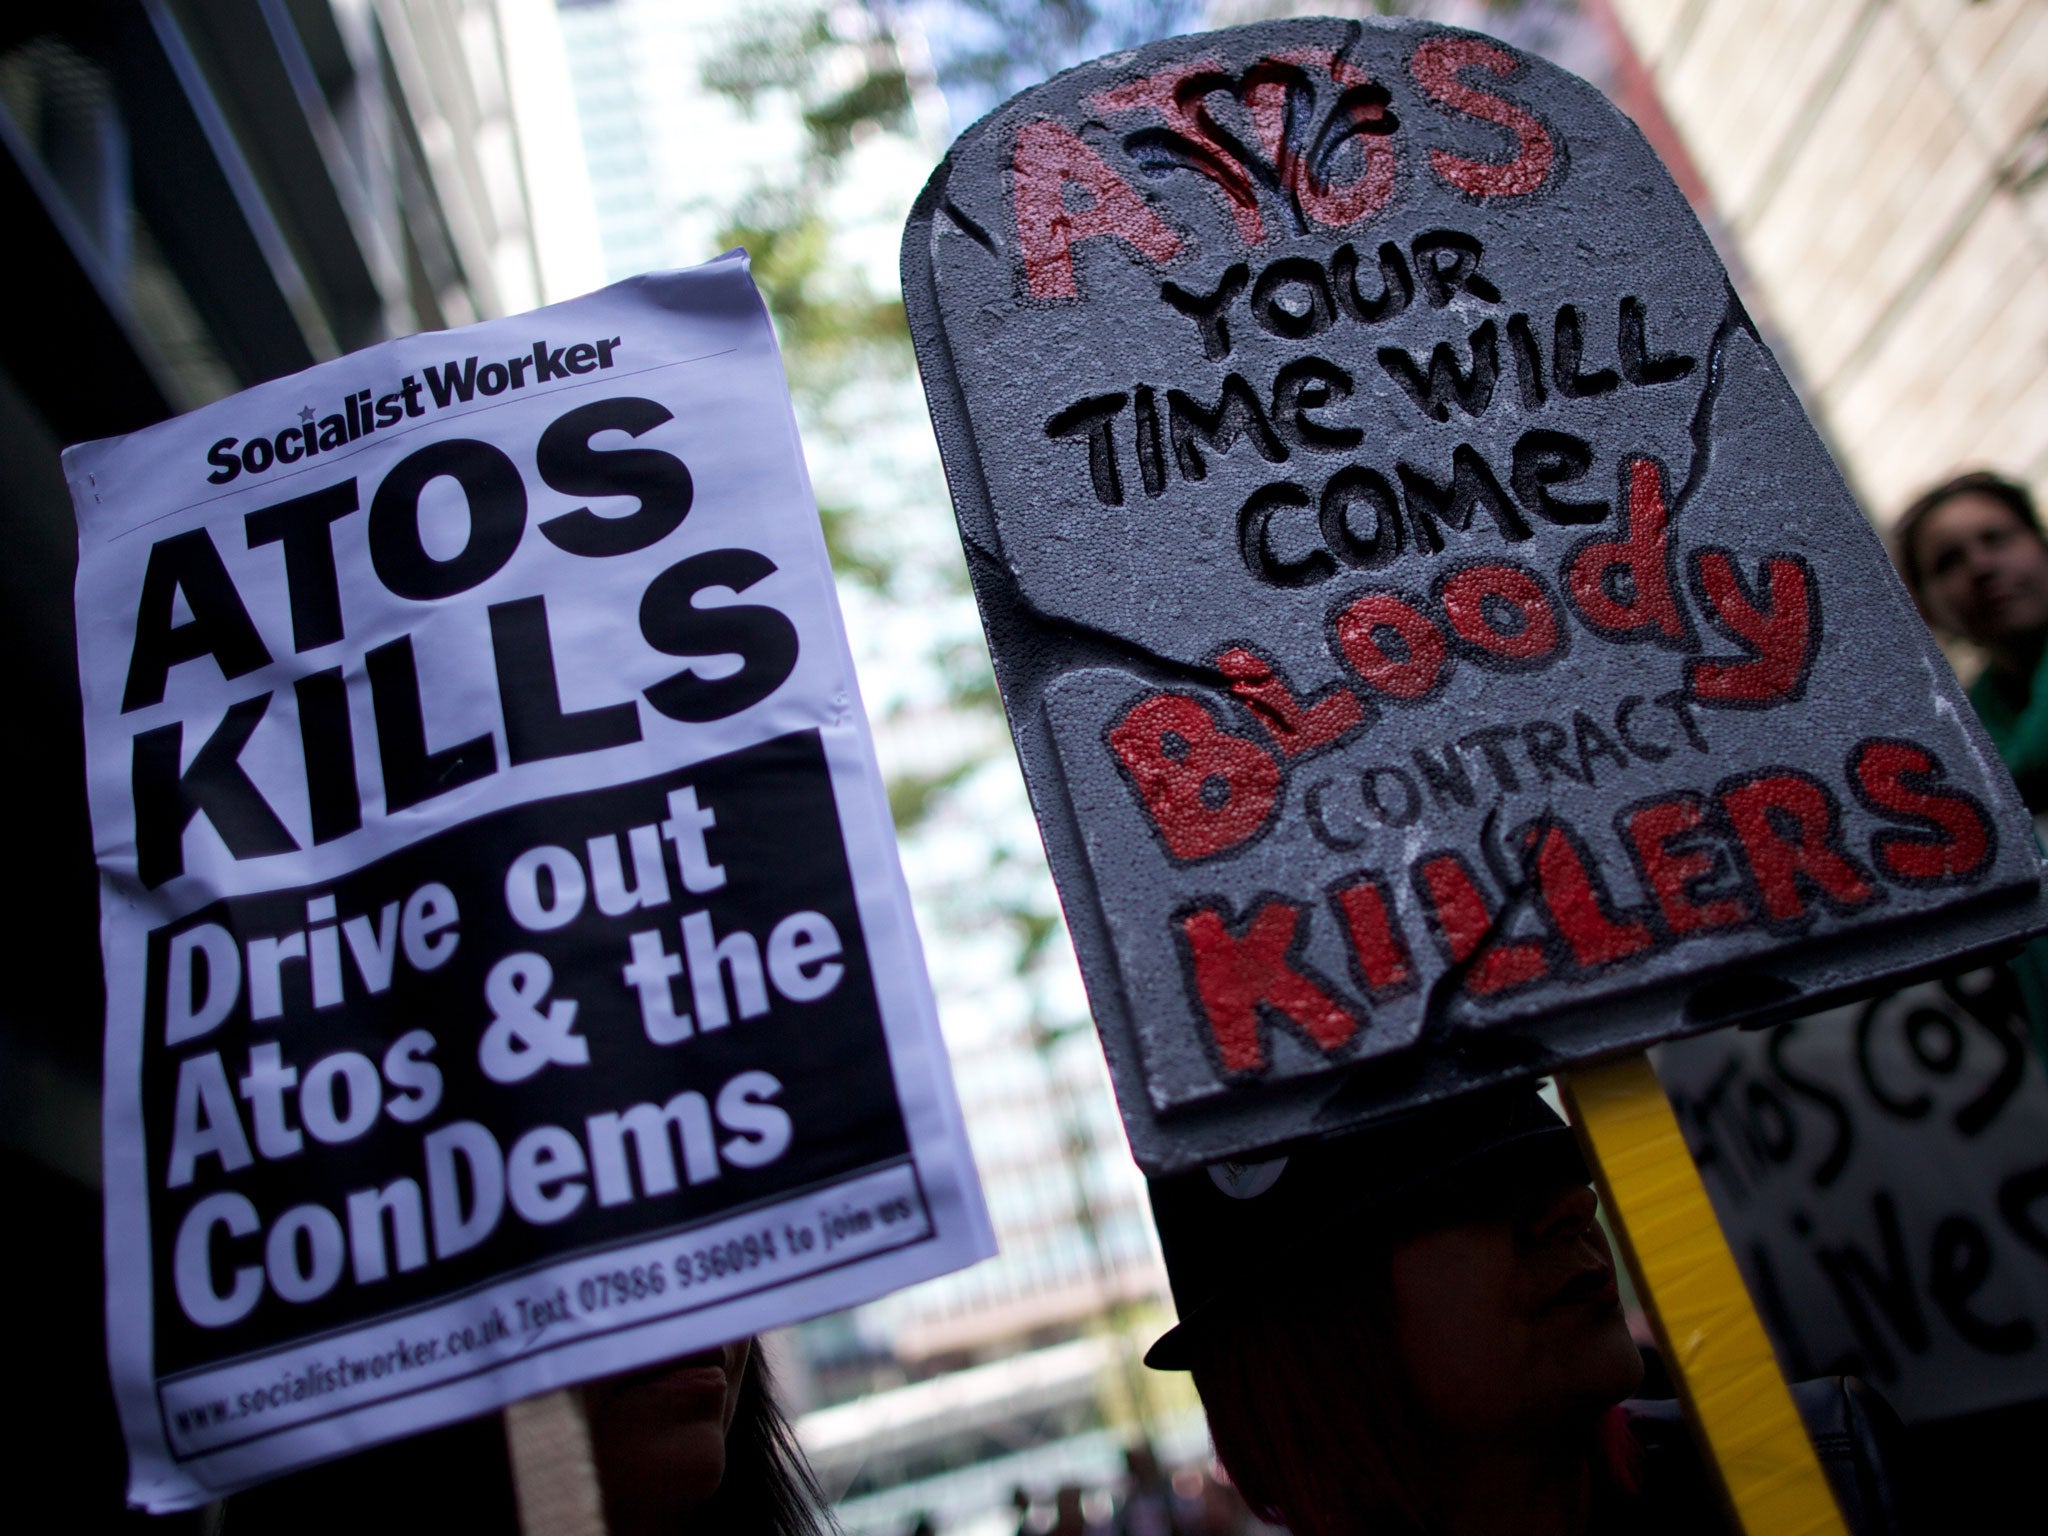 Protesters carry placards during a protest against Atos outside the company's head office in London last year